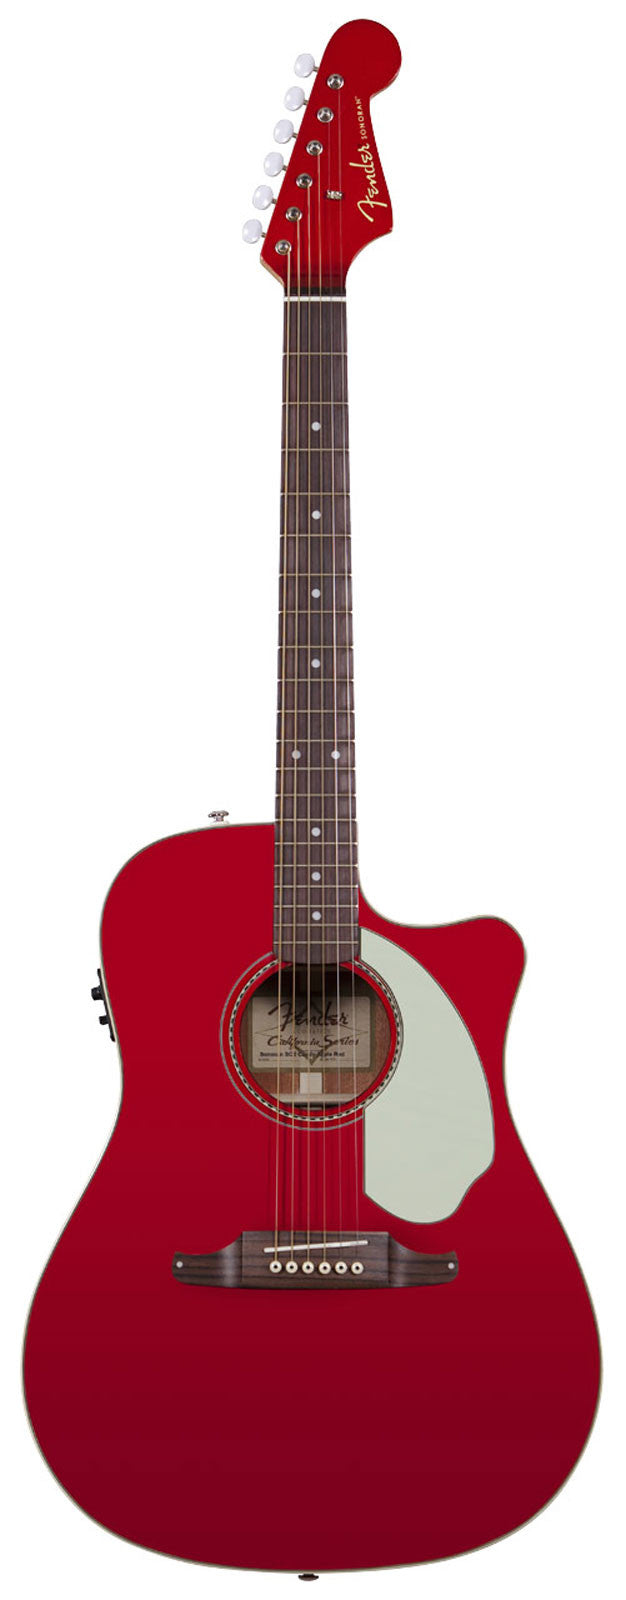 Fender - Sonoran SCE - Candy Apple Red